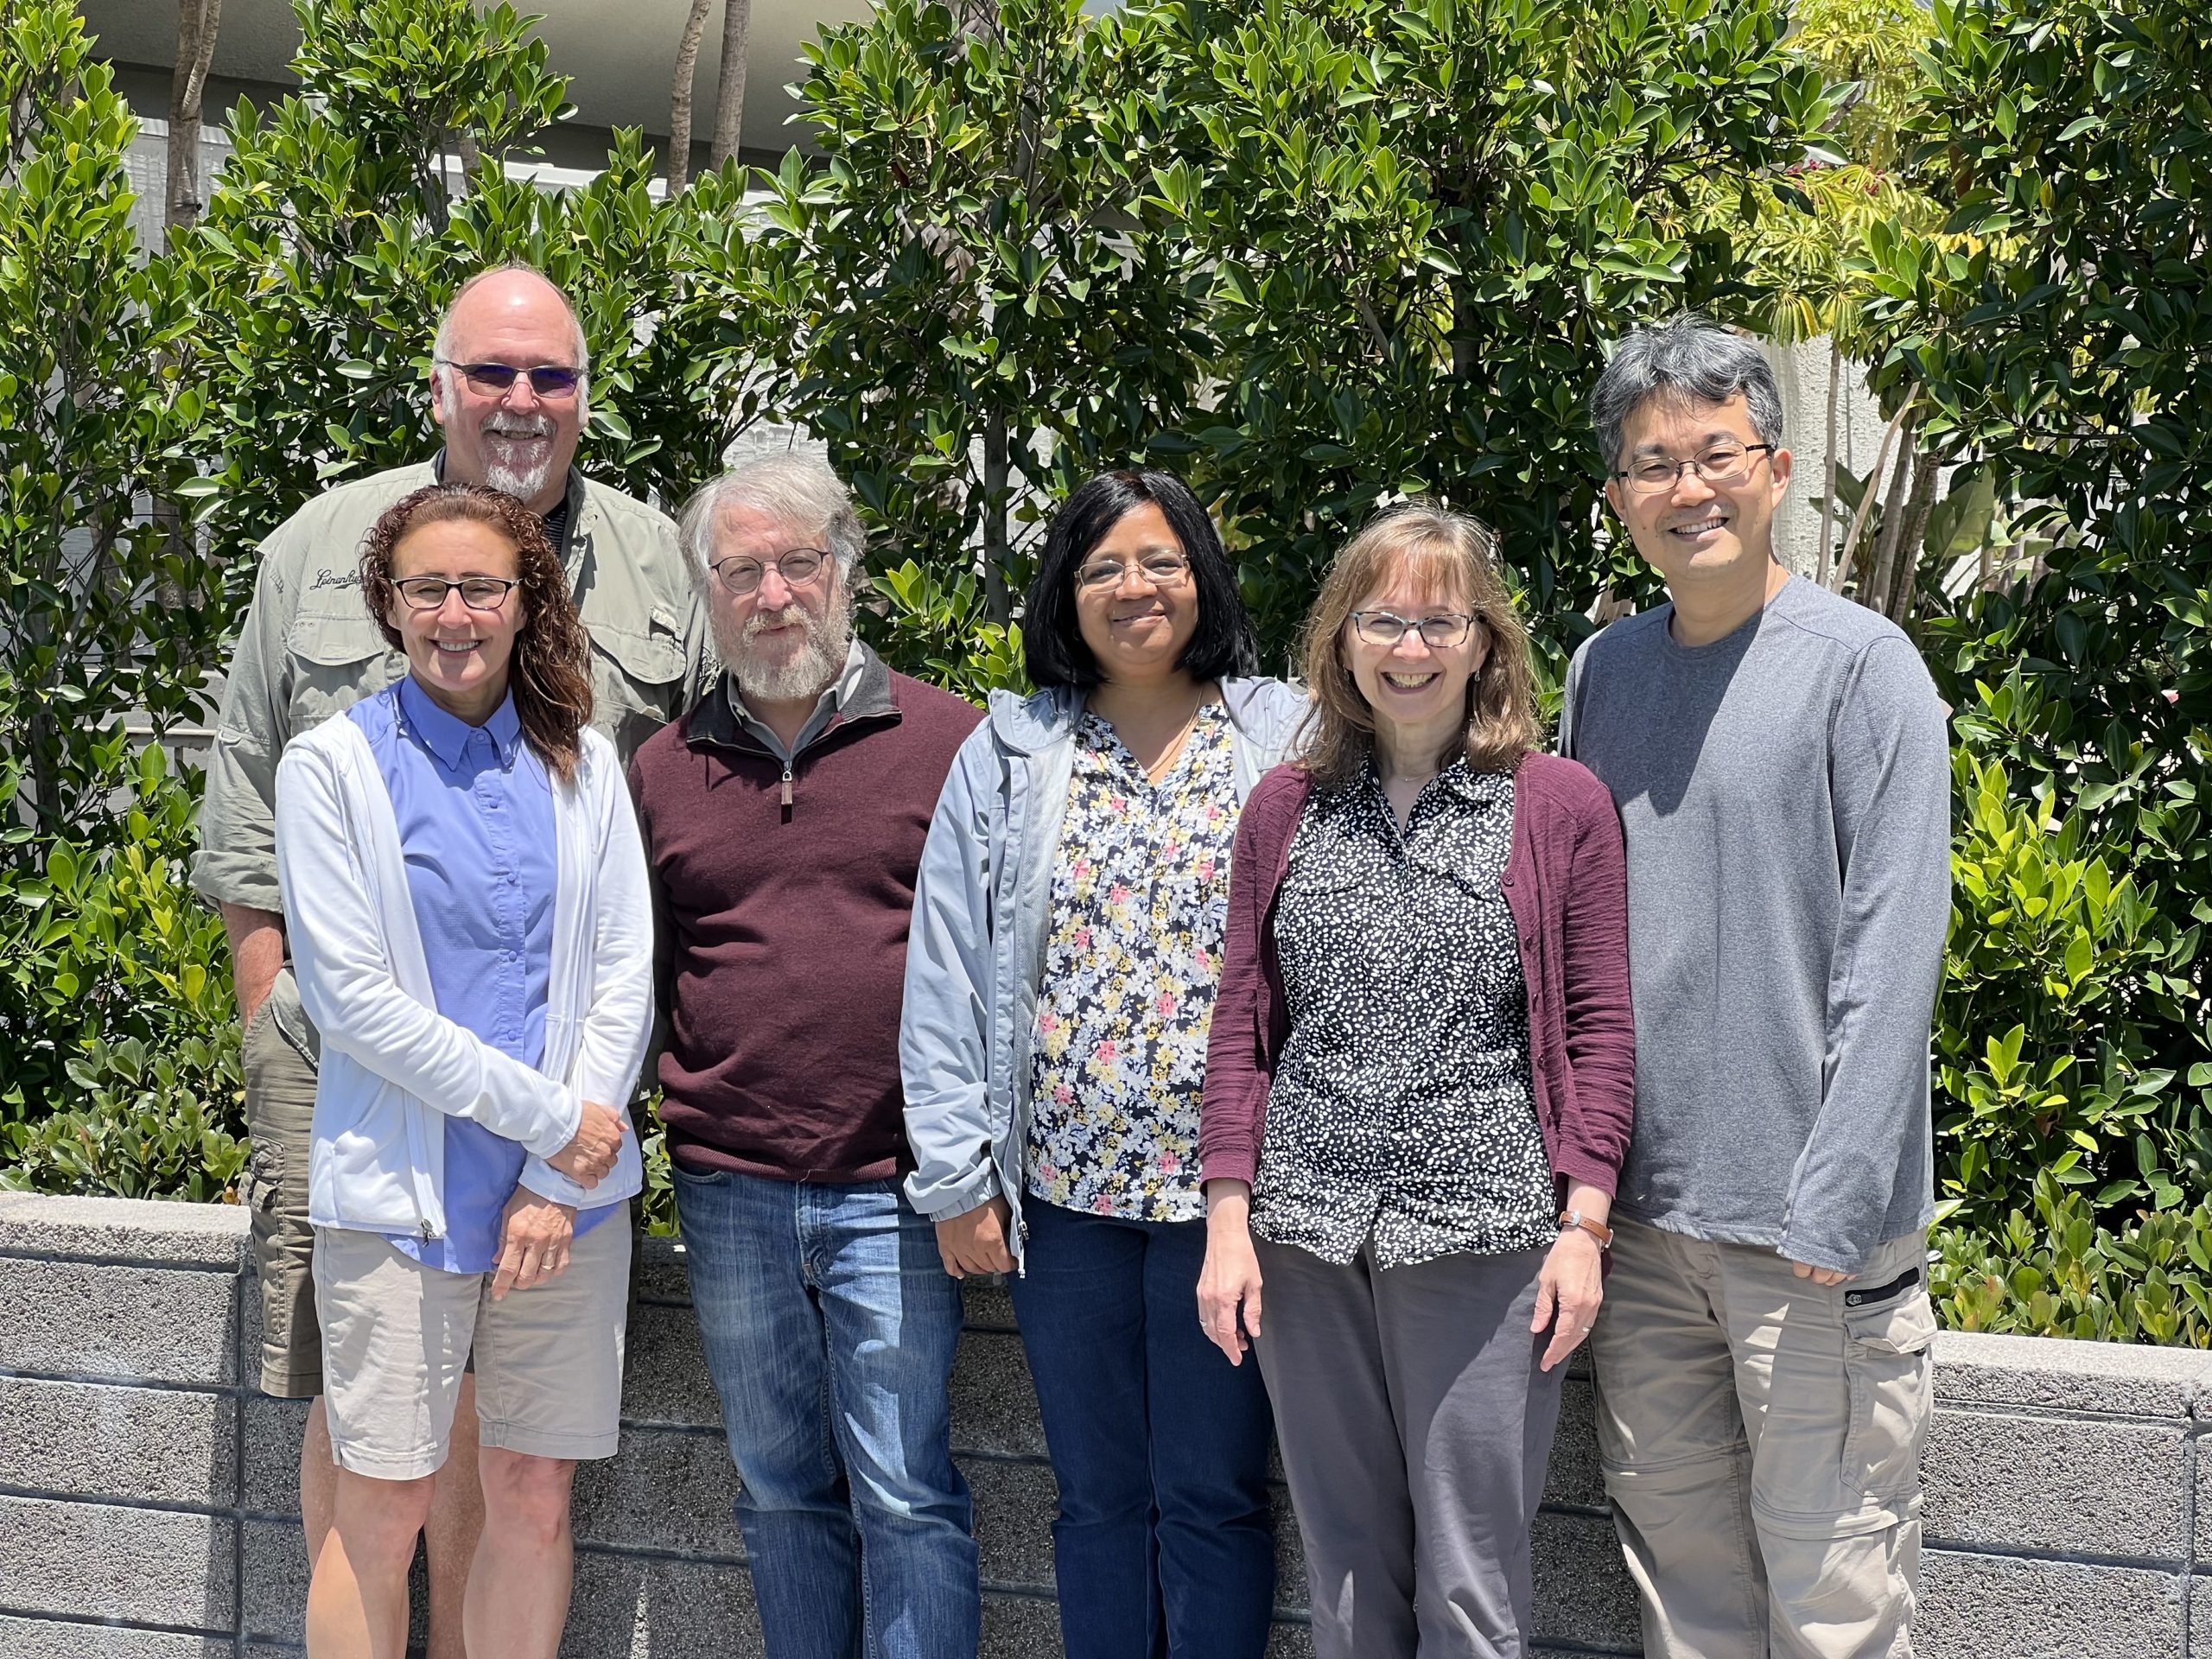 A group photo of, from left to right, Heidi Kaeppler, Bill Gordon-Kamm, Wayne Parrott, Veena Veena, Joyce Van Eck and Keunsub Lee. They are standing outside in front of a green bush.